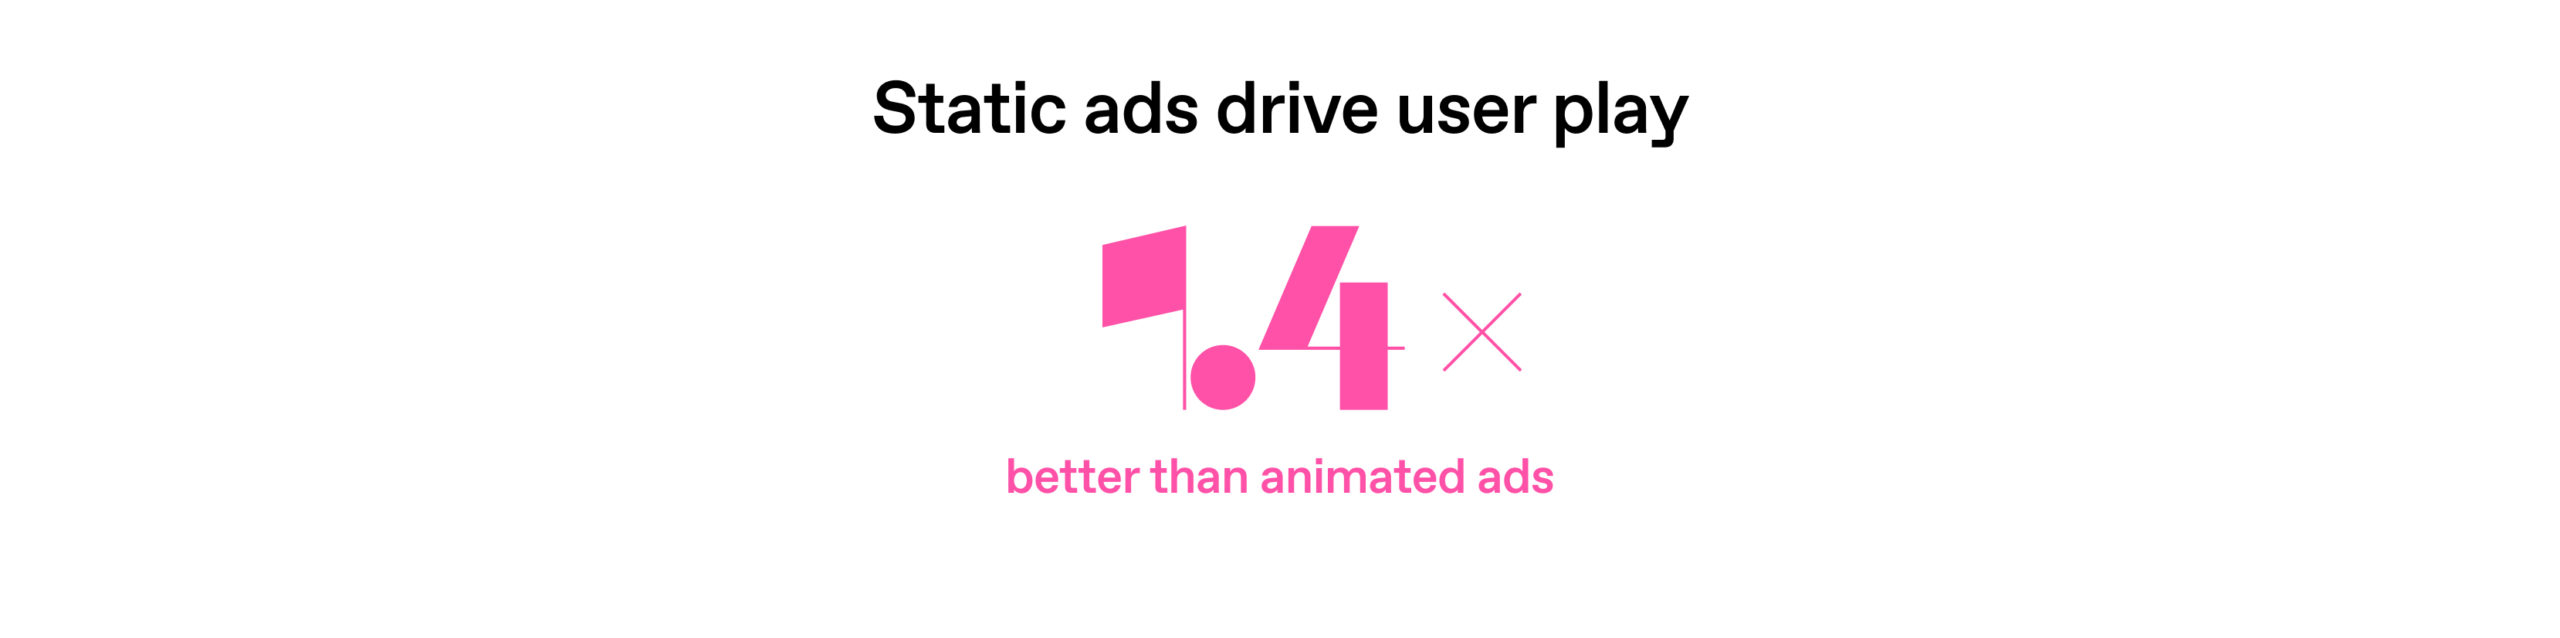 Static ads drive user play 1.4x better than animated ads